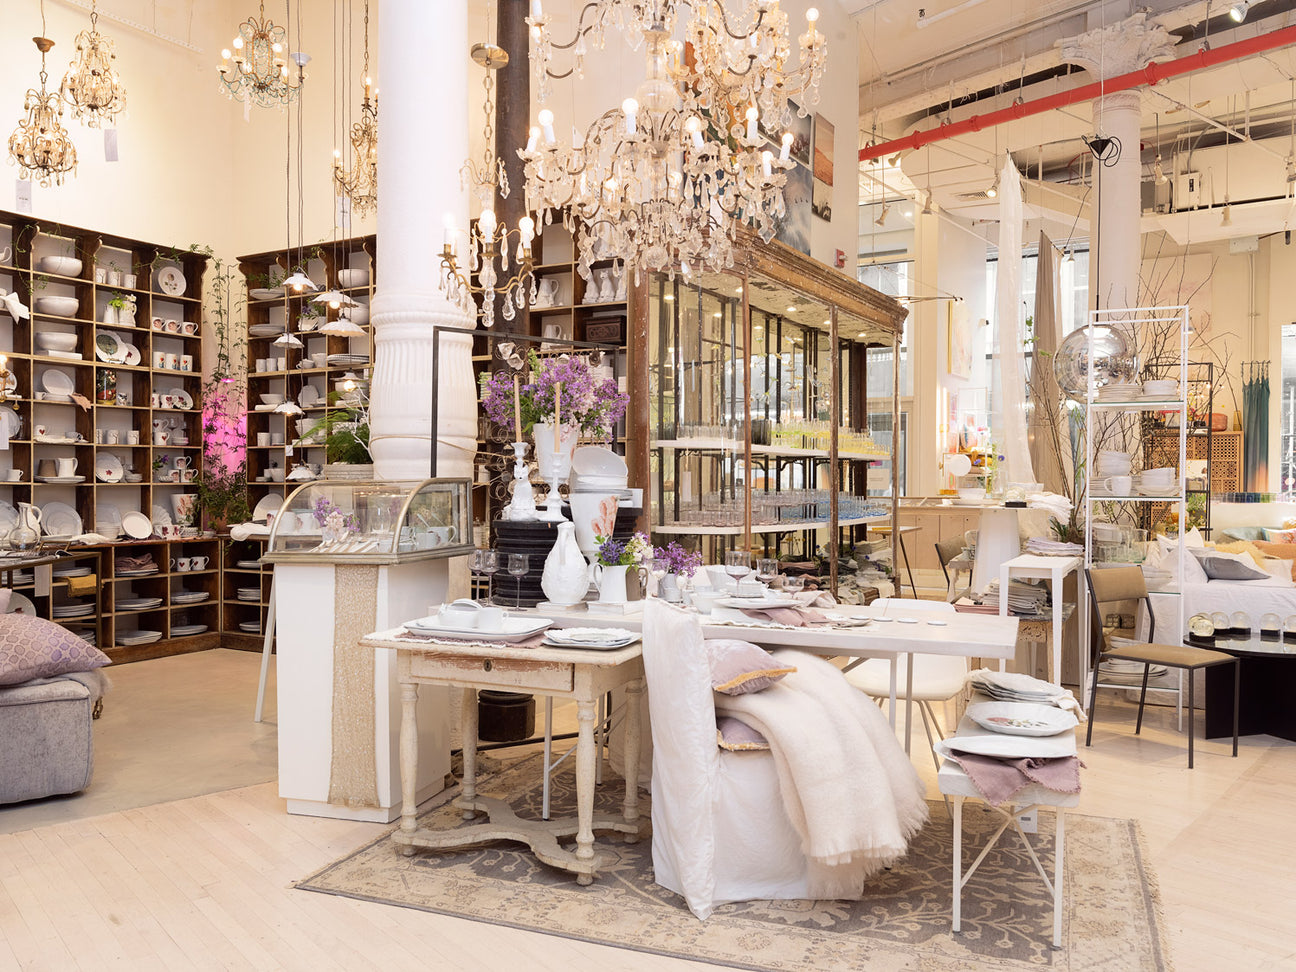 Elegantly arranged home decor store showcases luxurious furnishings and accessories.